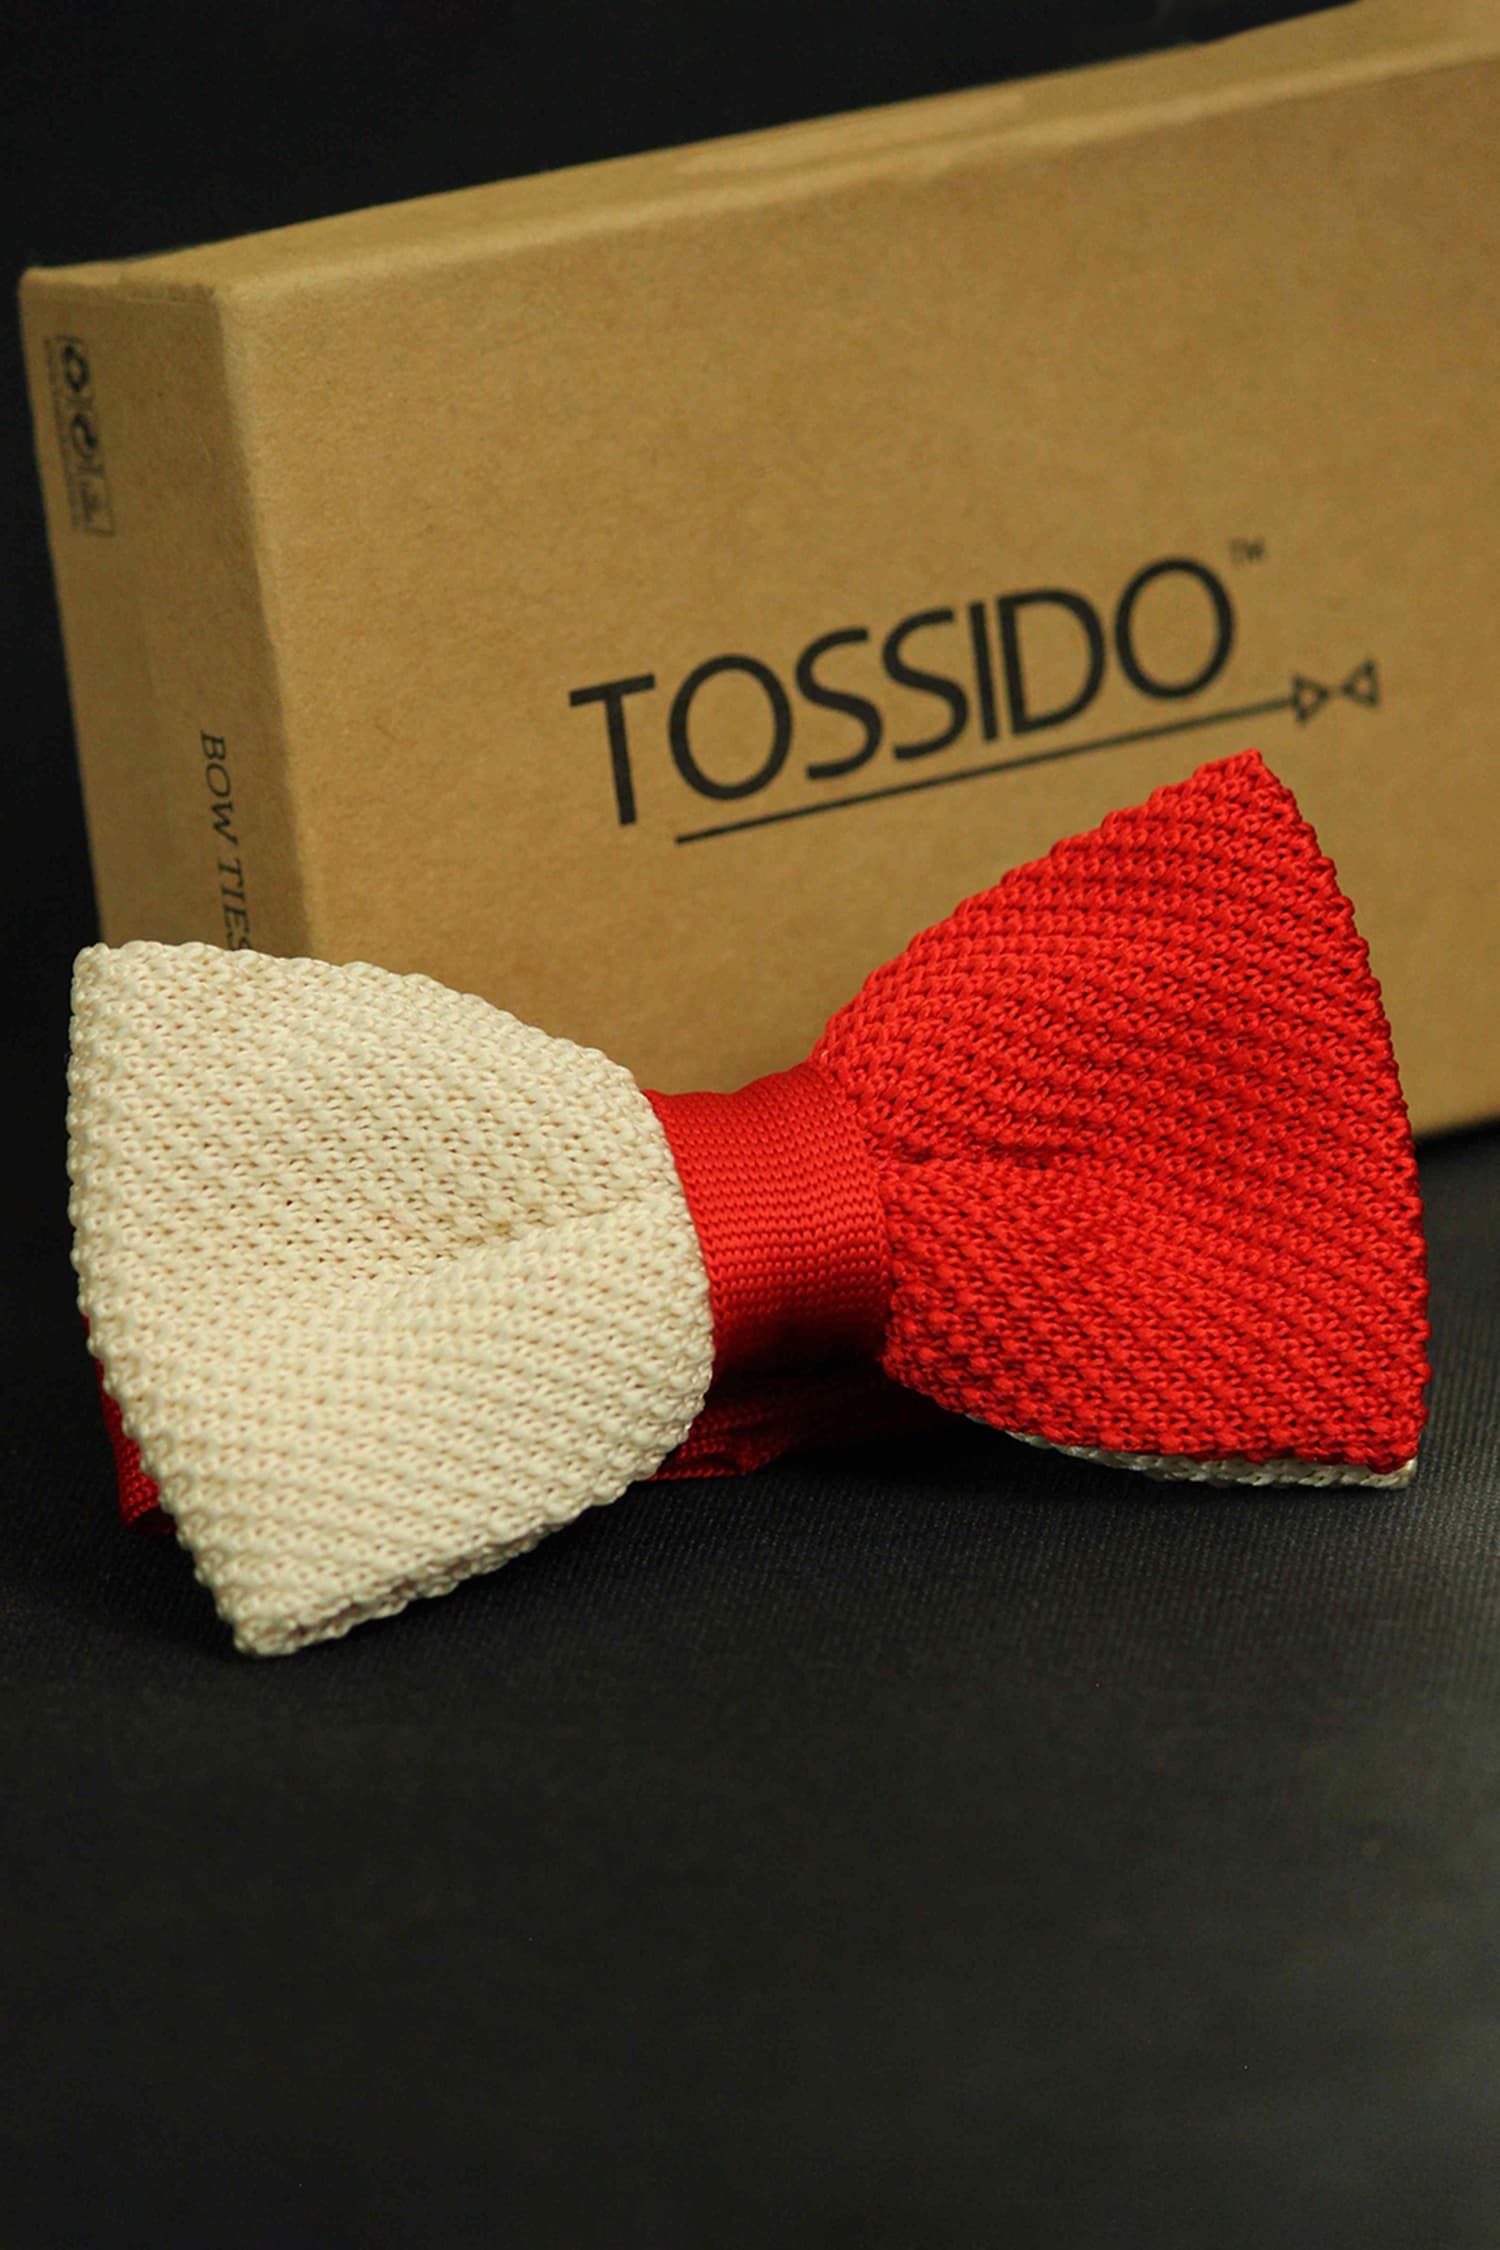 Tossido Red Embroidered Colorblock Bow Tie